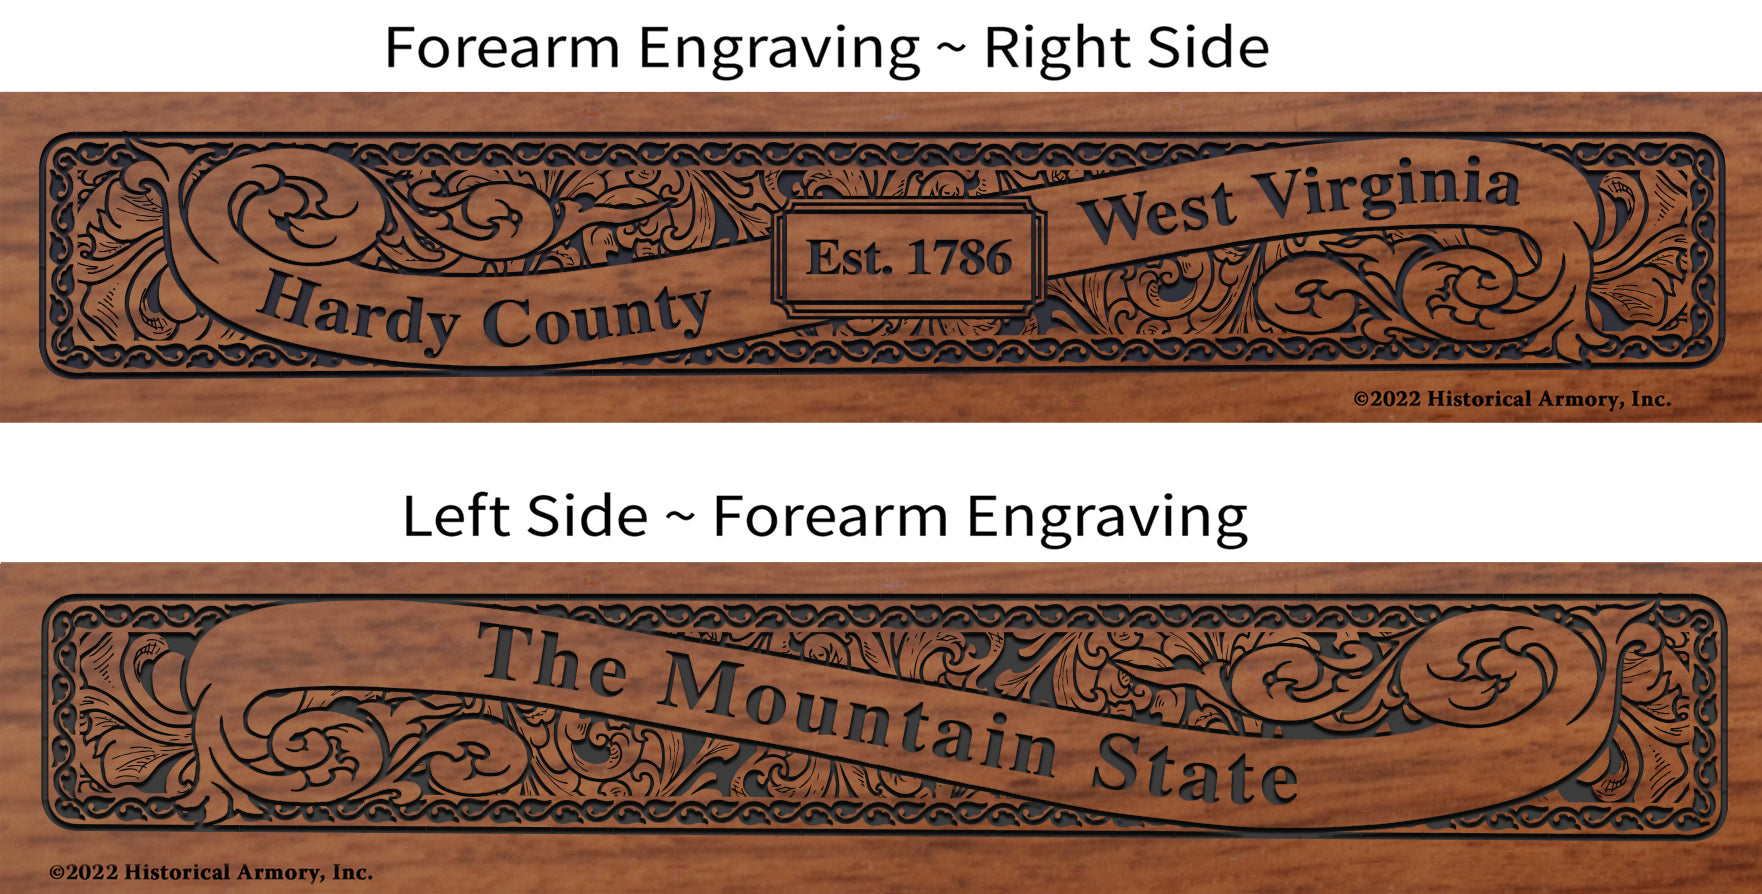 Hardy County West Virginia Engraved Rifle Forearm